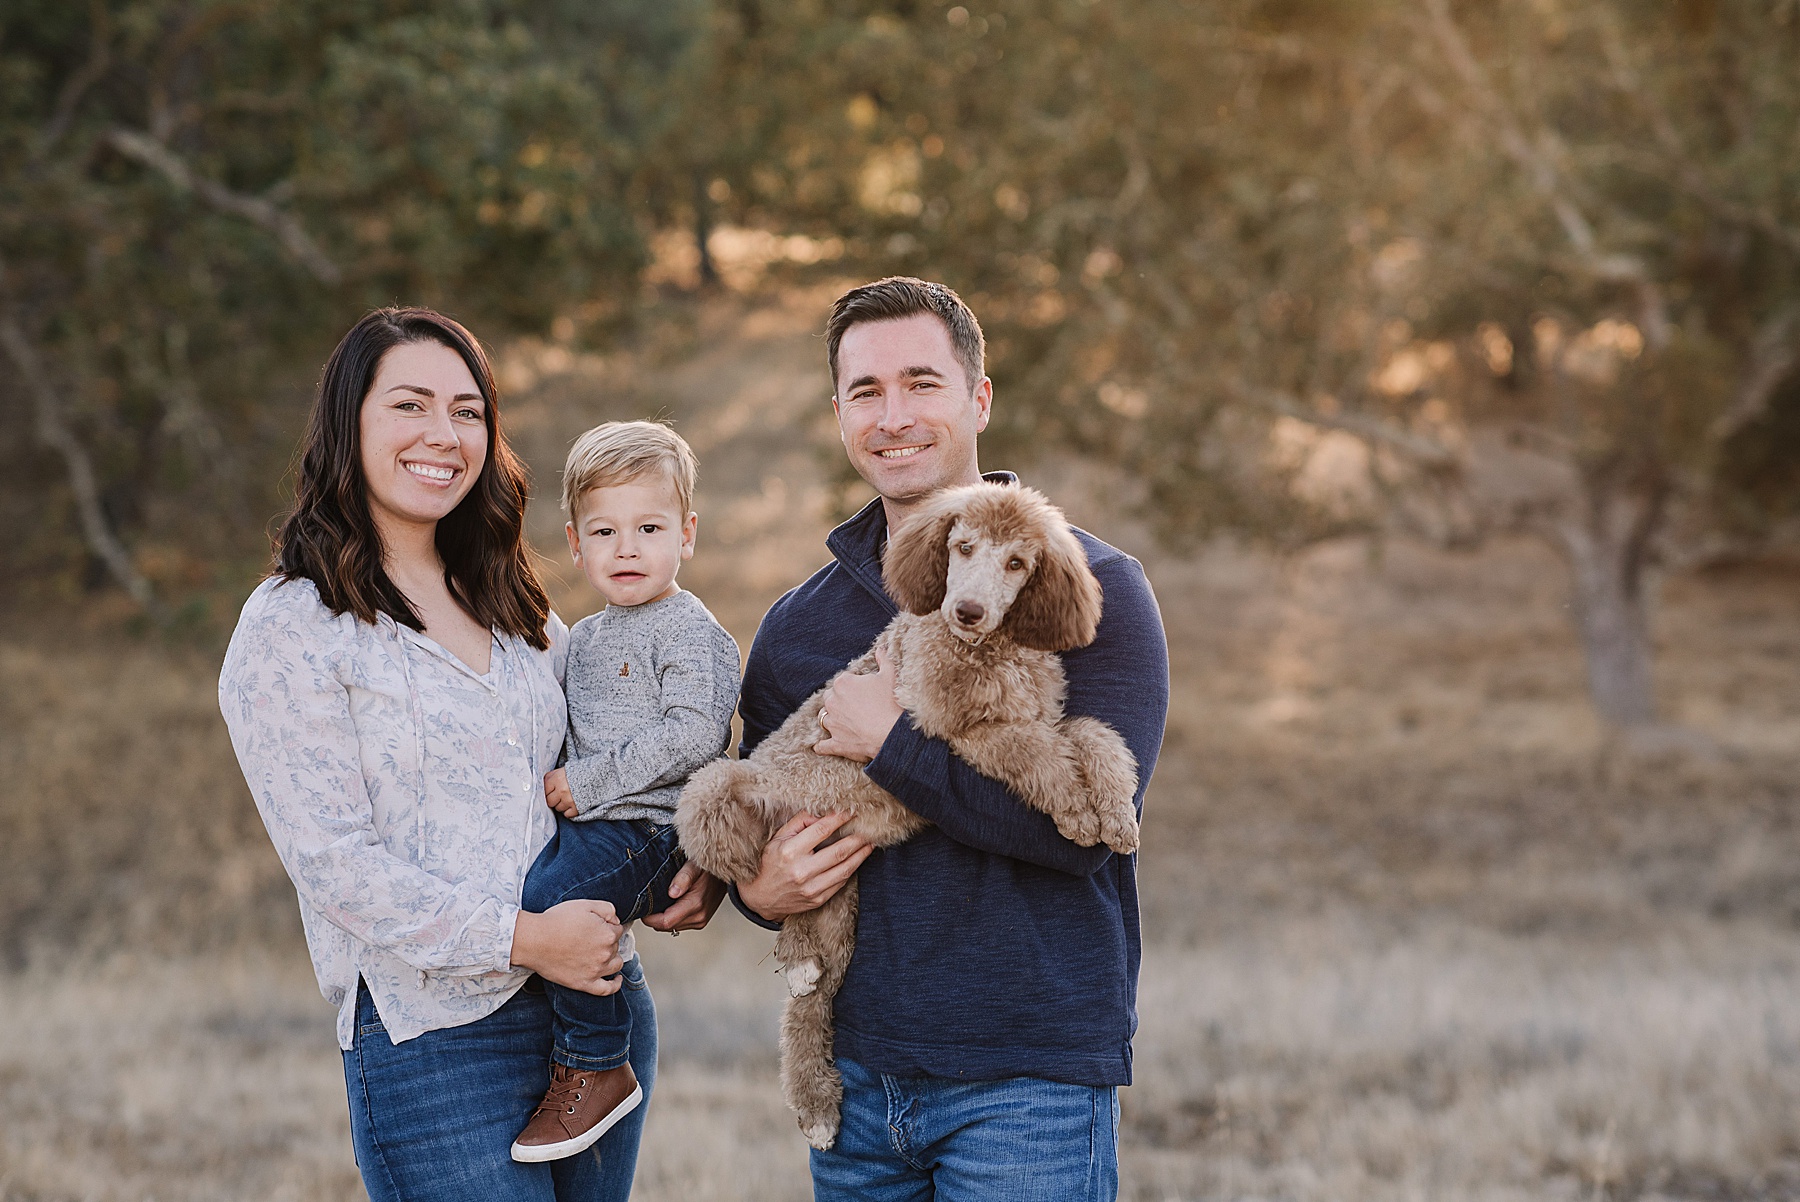 How to Get the Perfect Family Photo | From a San Luis Obispo Photographer